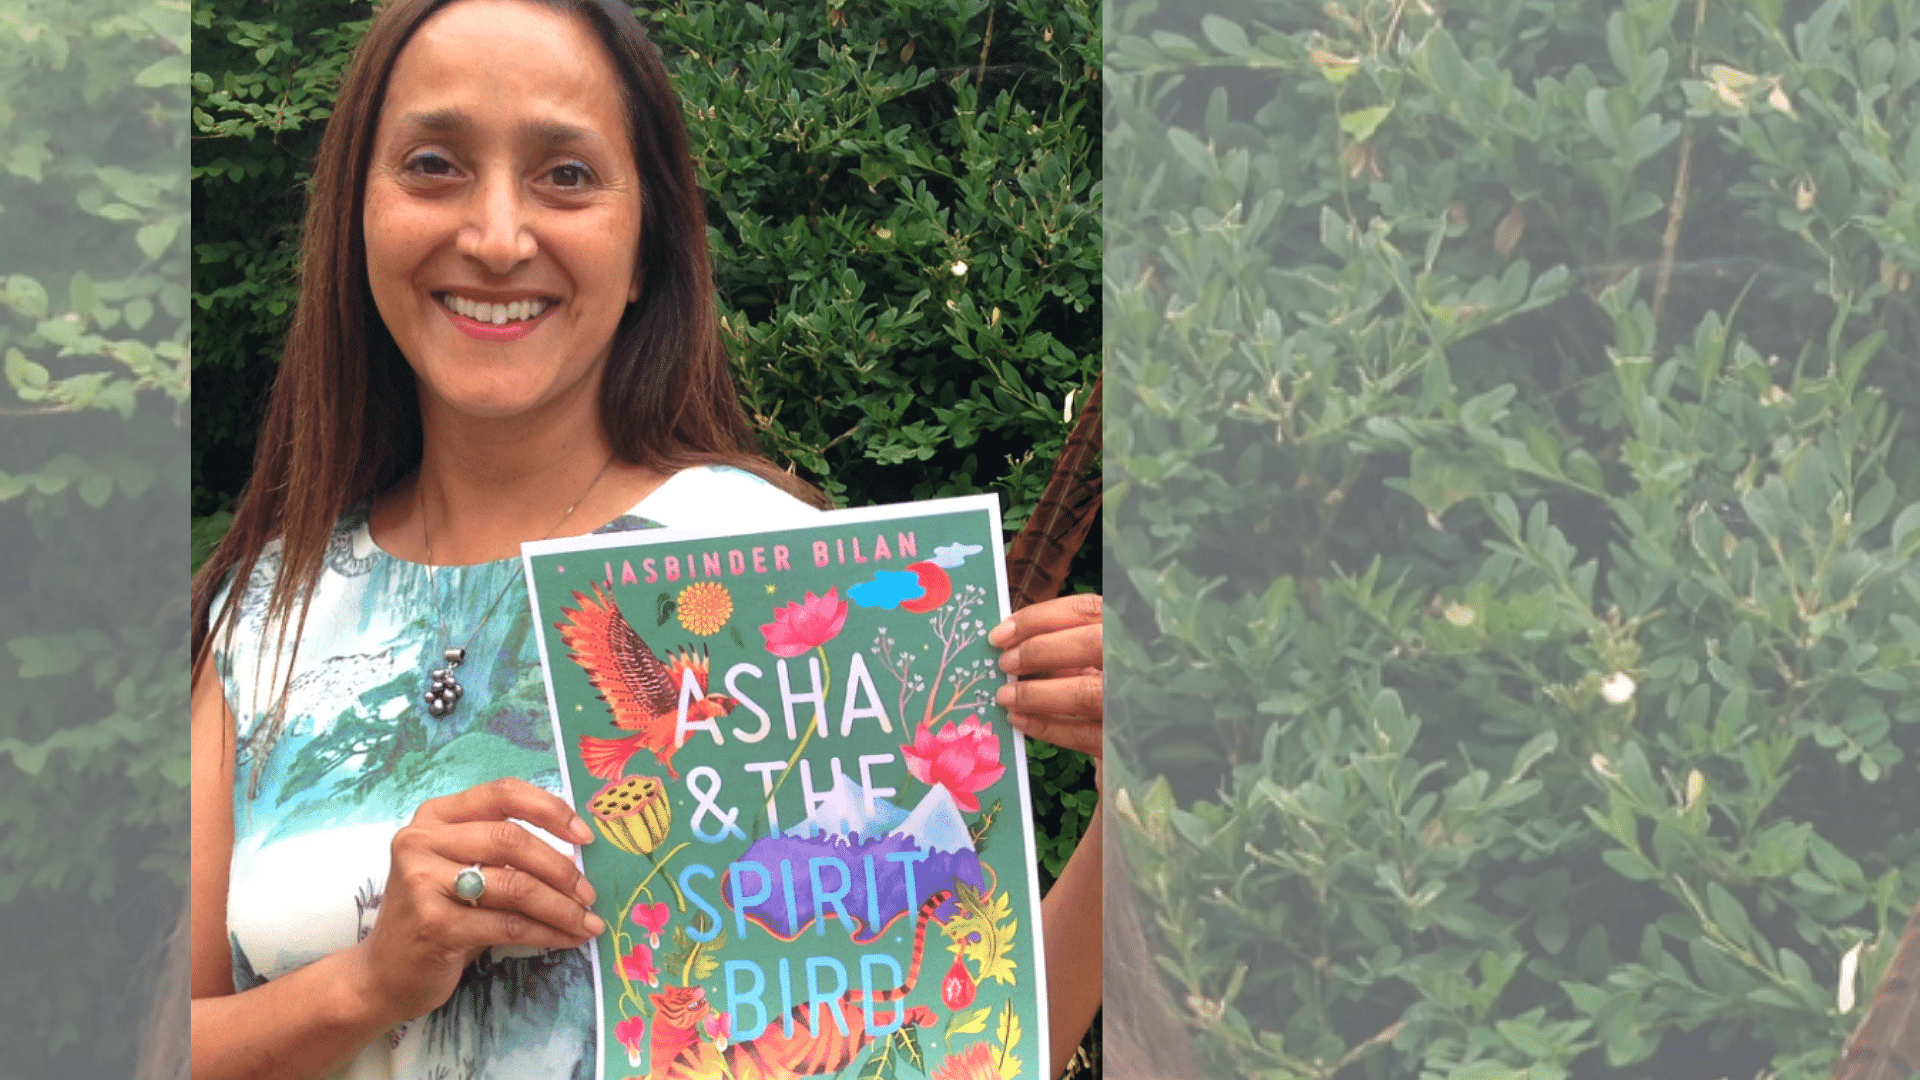 Jasbinder Bilan has bagged a coveted UK children’s book award for her debut novel set in the Himalayas.